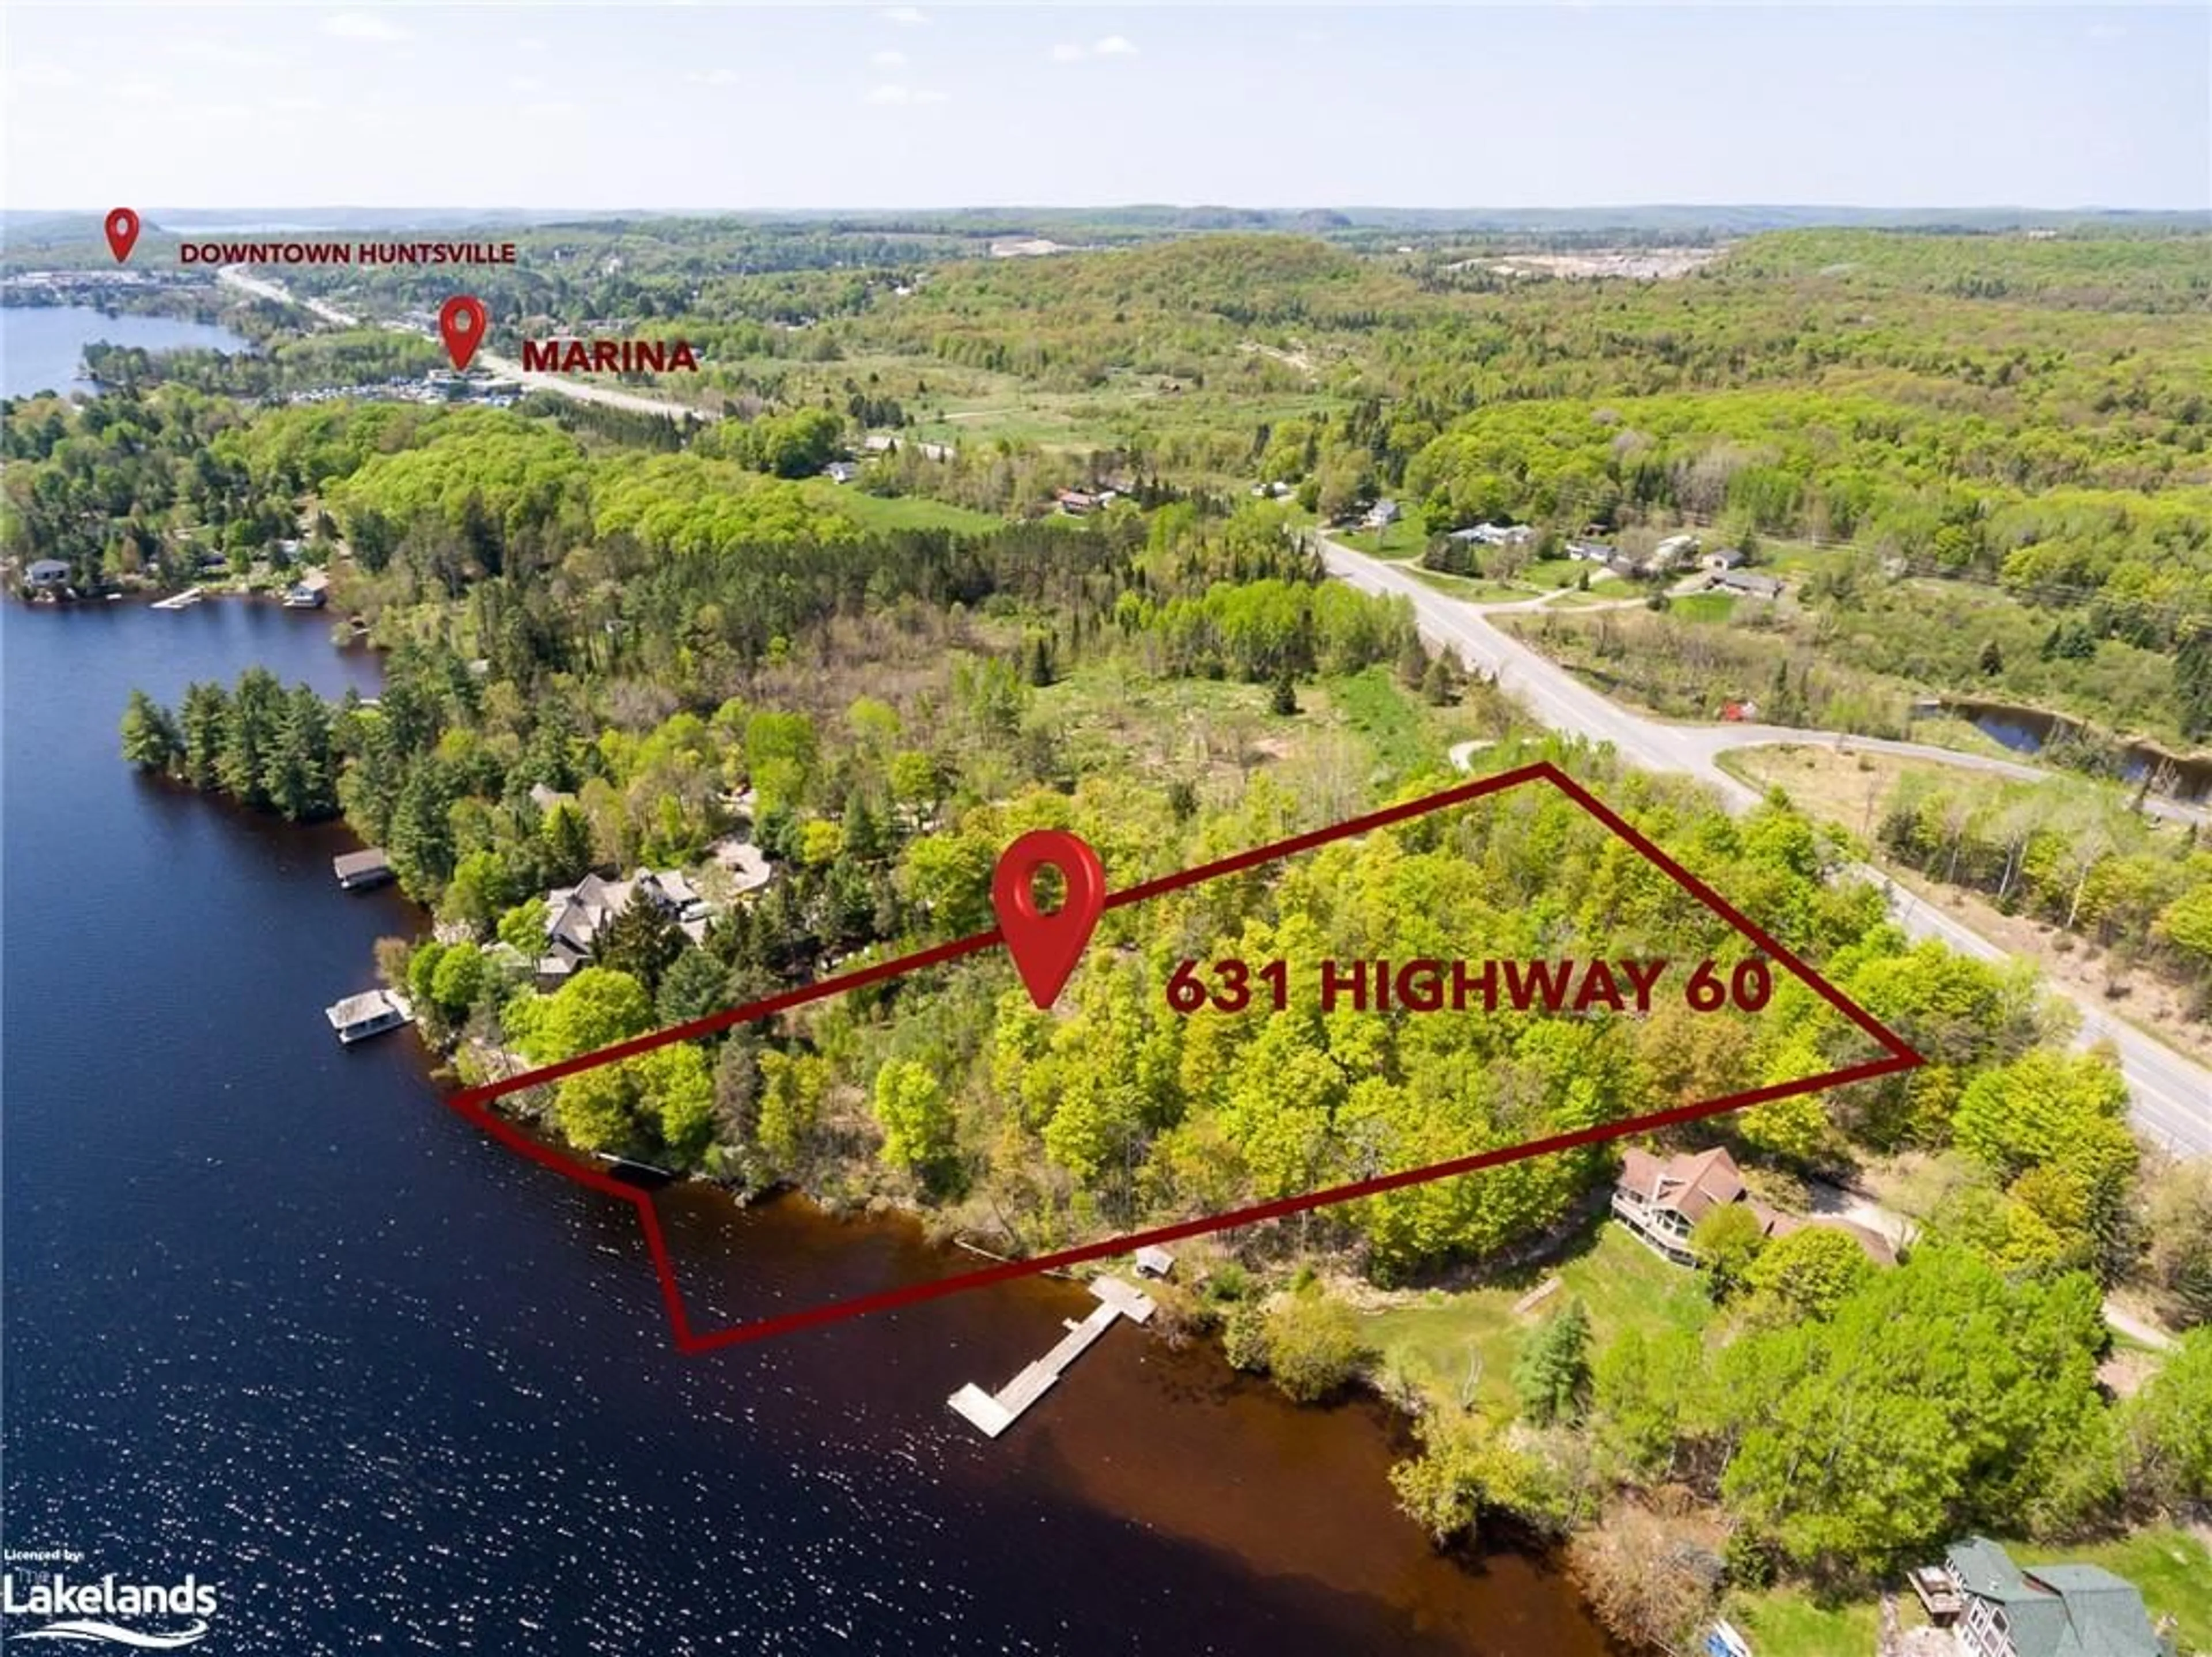 Lakeview for 631 Highway 60, Huntsville Ontario P1H 1B4